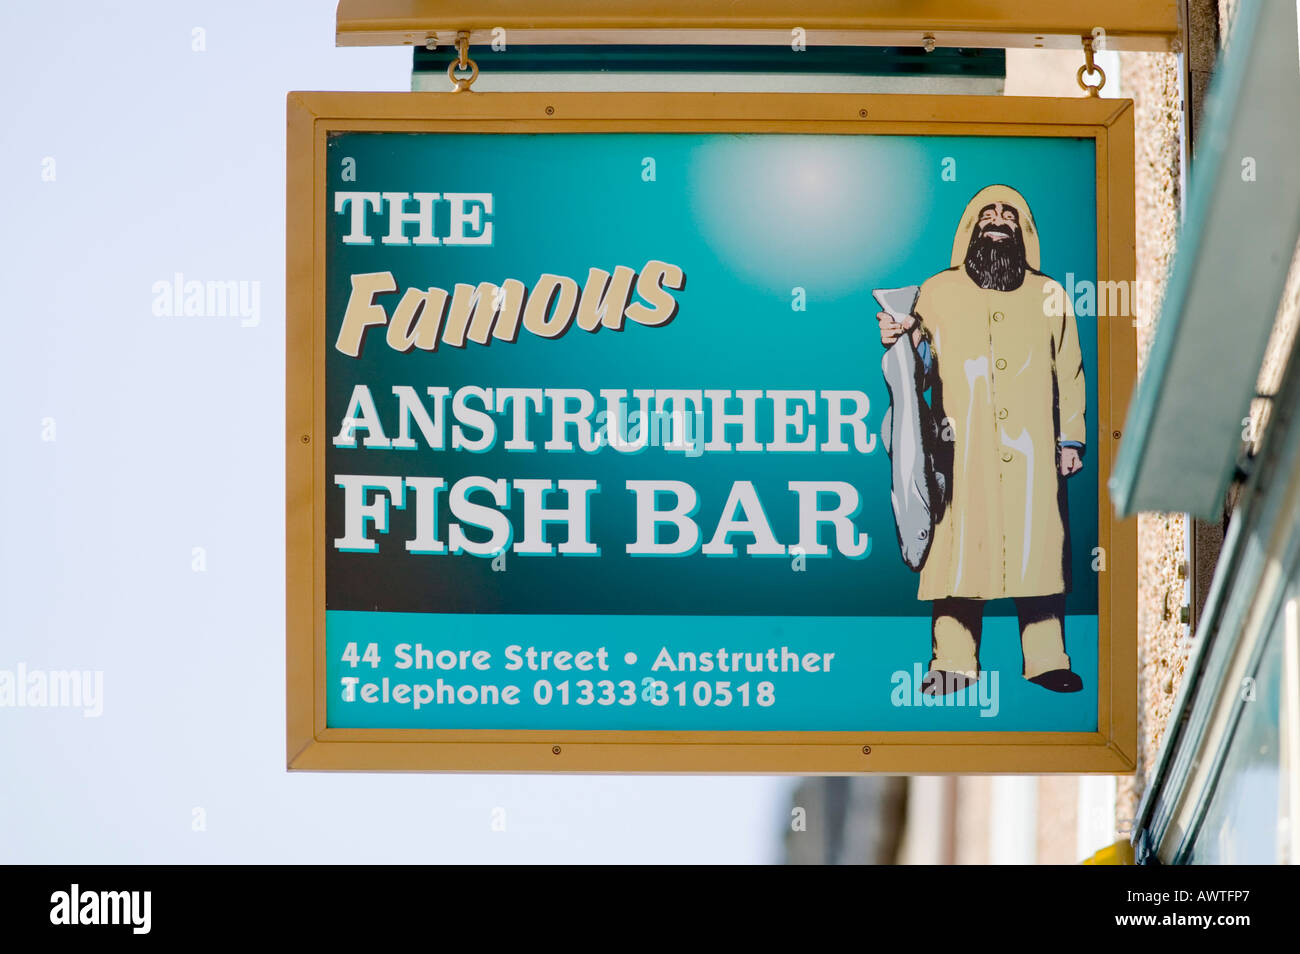 The Famous Anstruther Fish Bar, Anstruther, East Neuk of Fife  Scotland Stock Photo